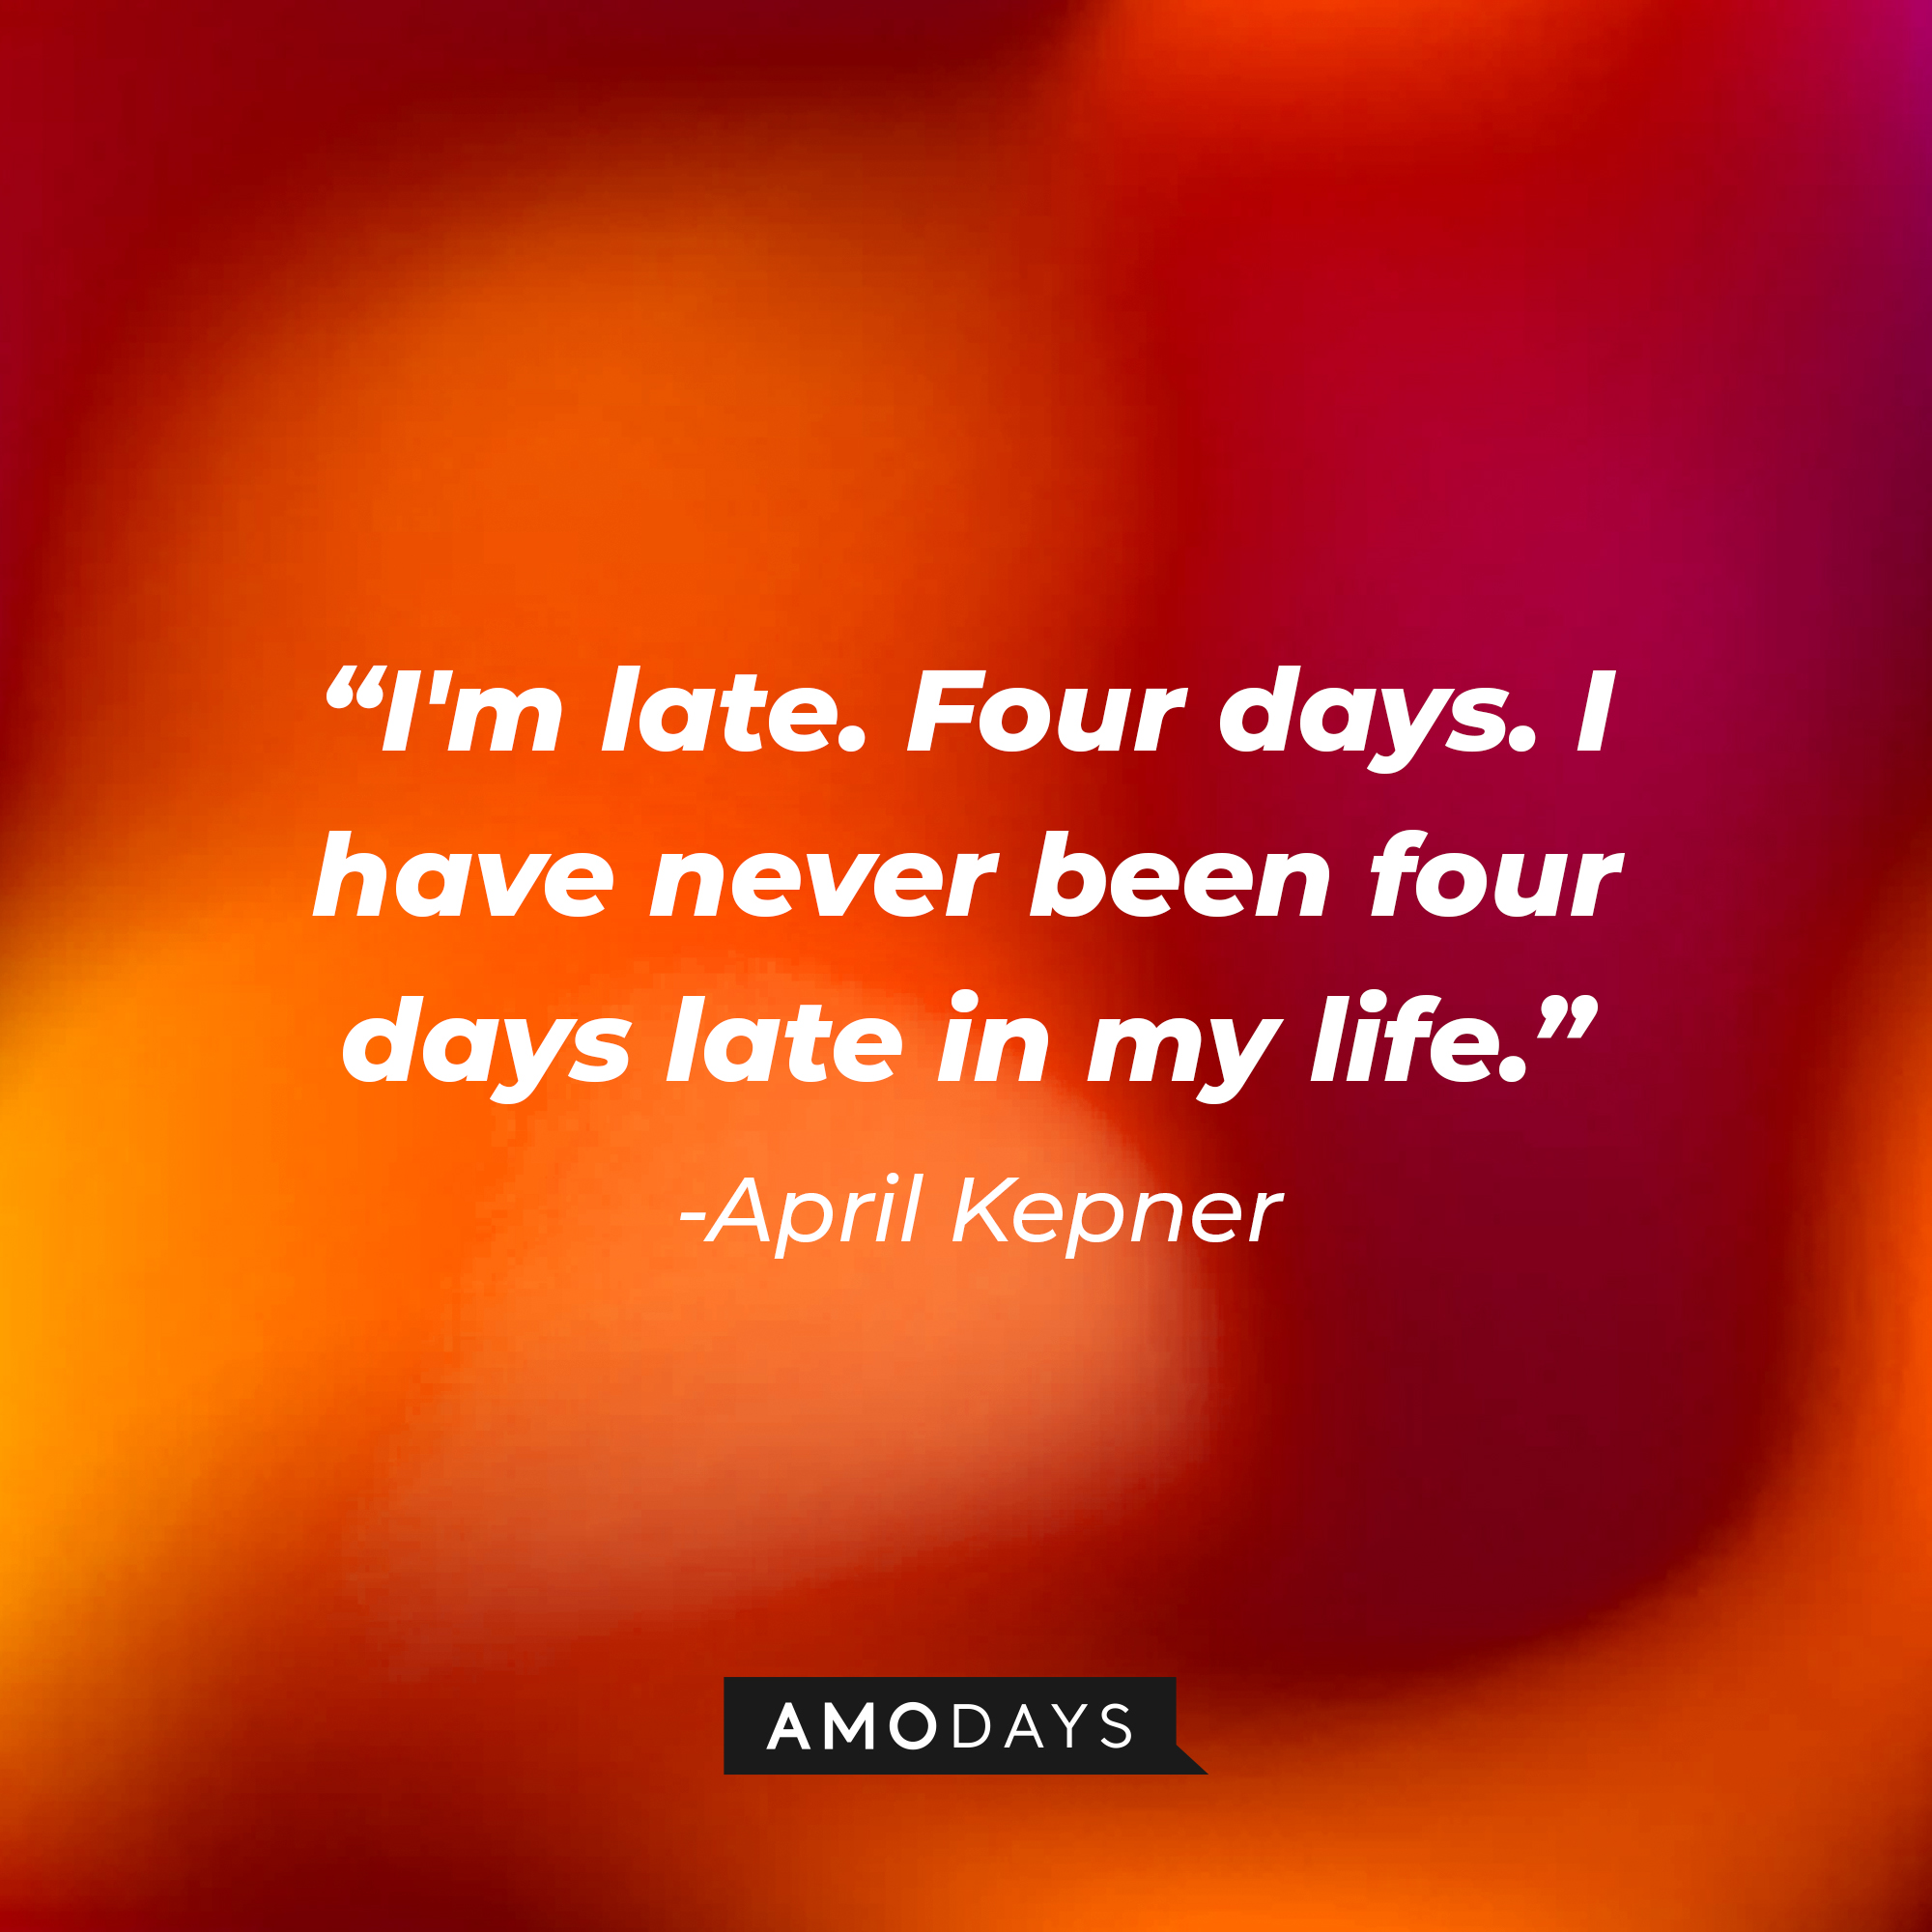 April Kepner's quote: "I'm late. Four days. I have never been four days late in my life." | Source: AmoDays